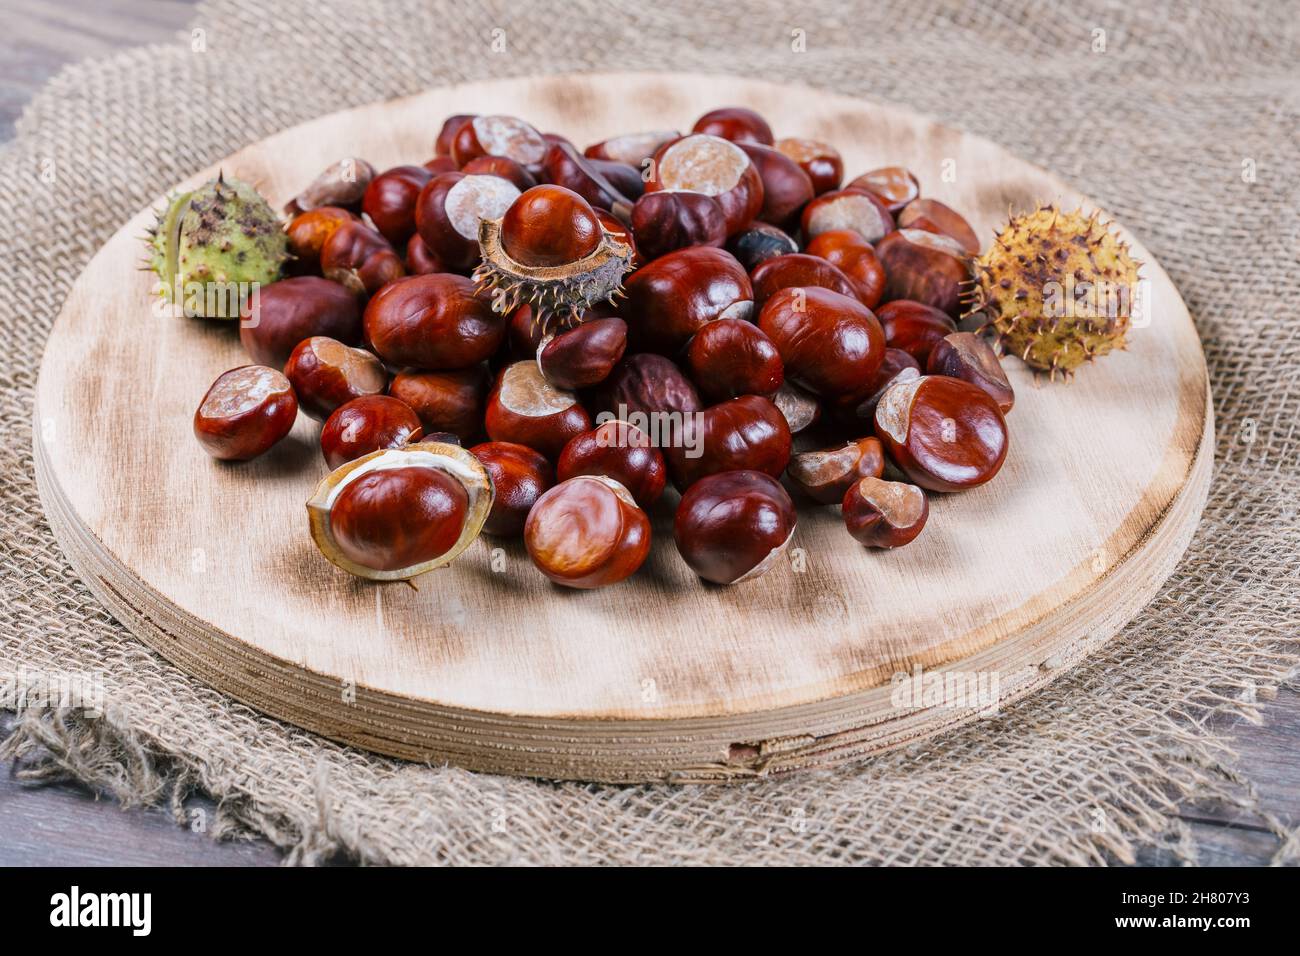 Edible chestnut kernels lie on a wooden cutting board made of plywood. Stock Photo